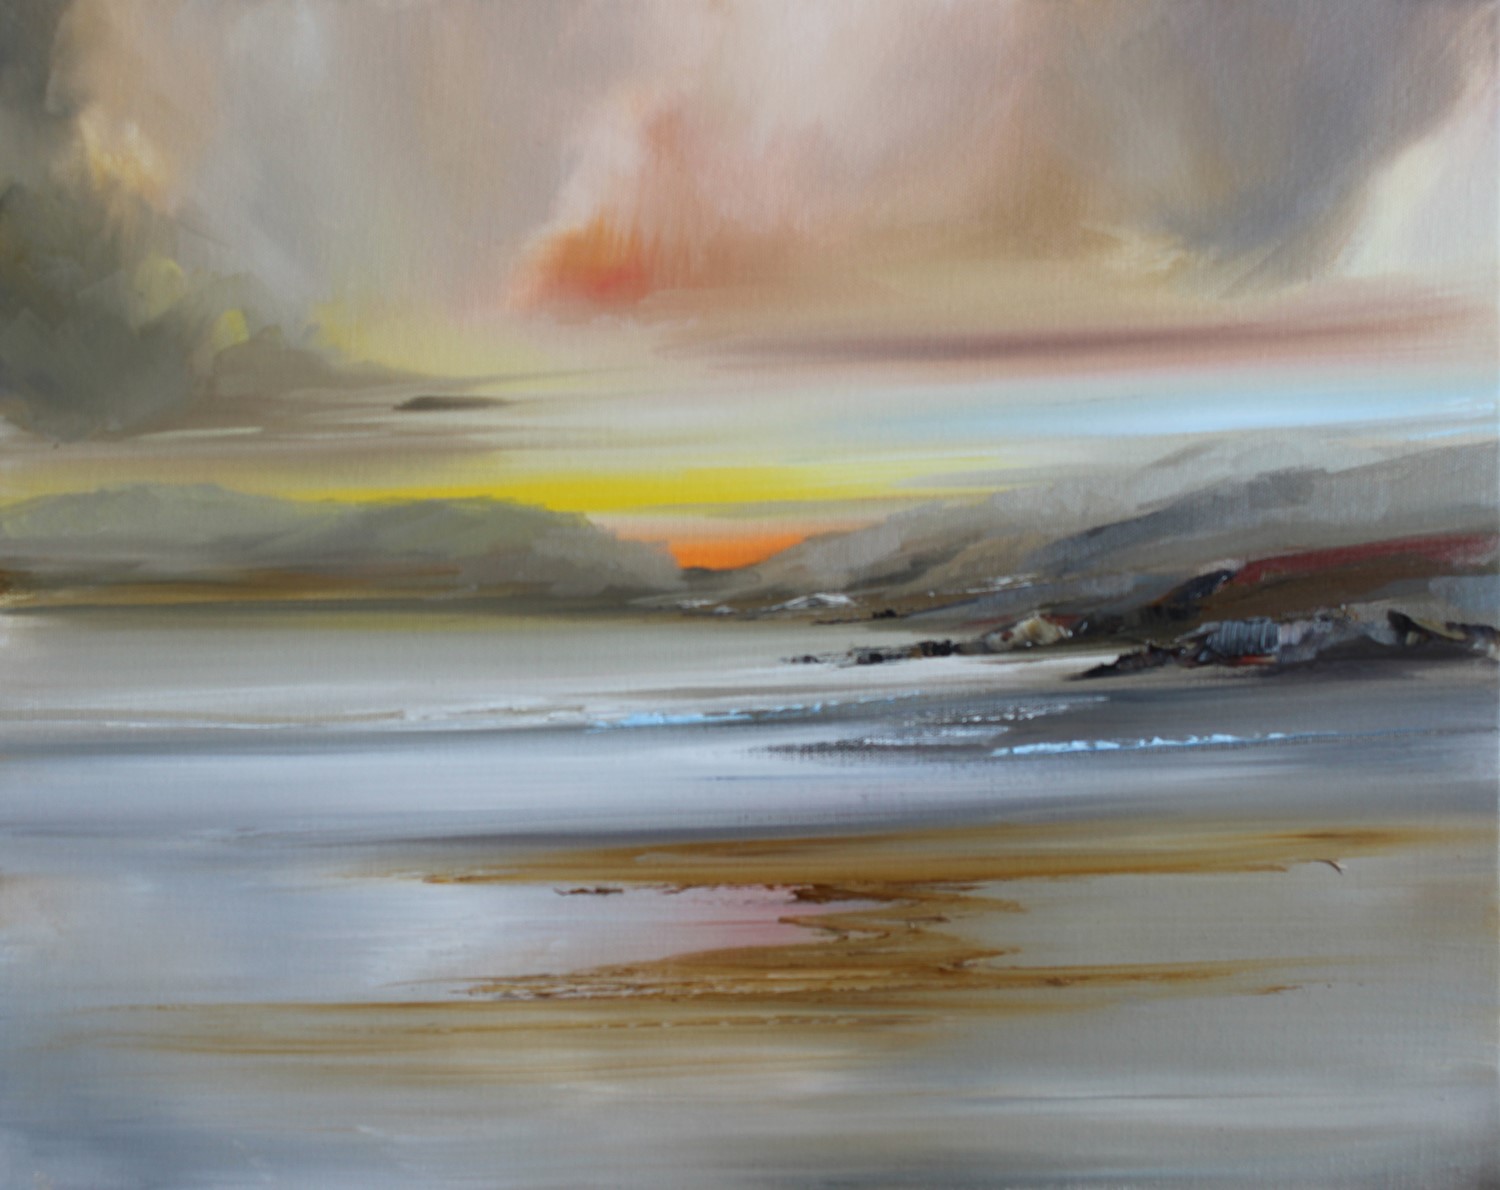 'Hills leading down to the shore' by artist Rosanne Barr